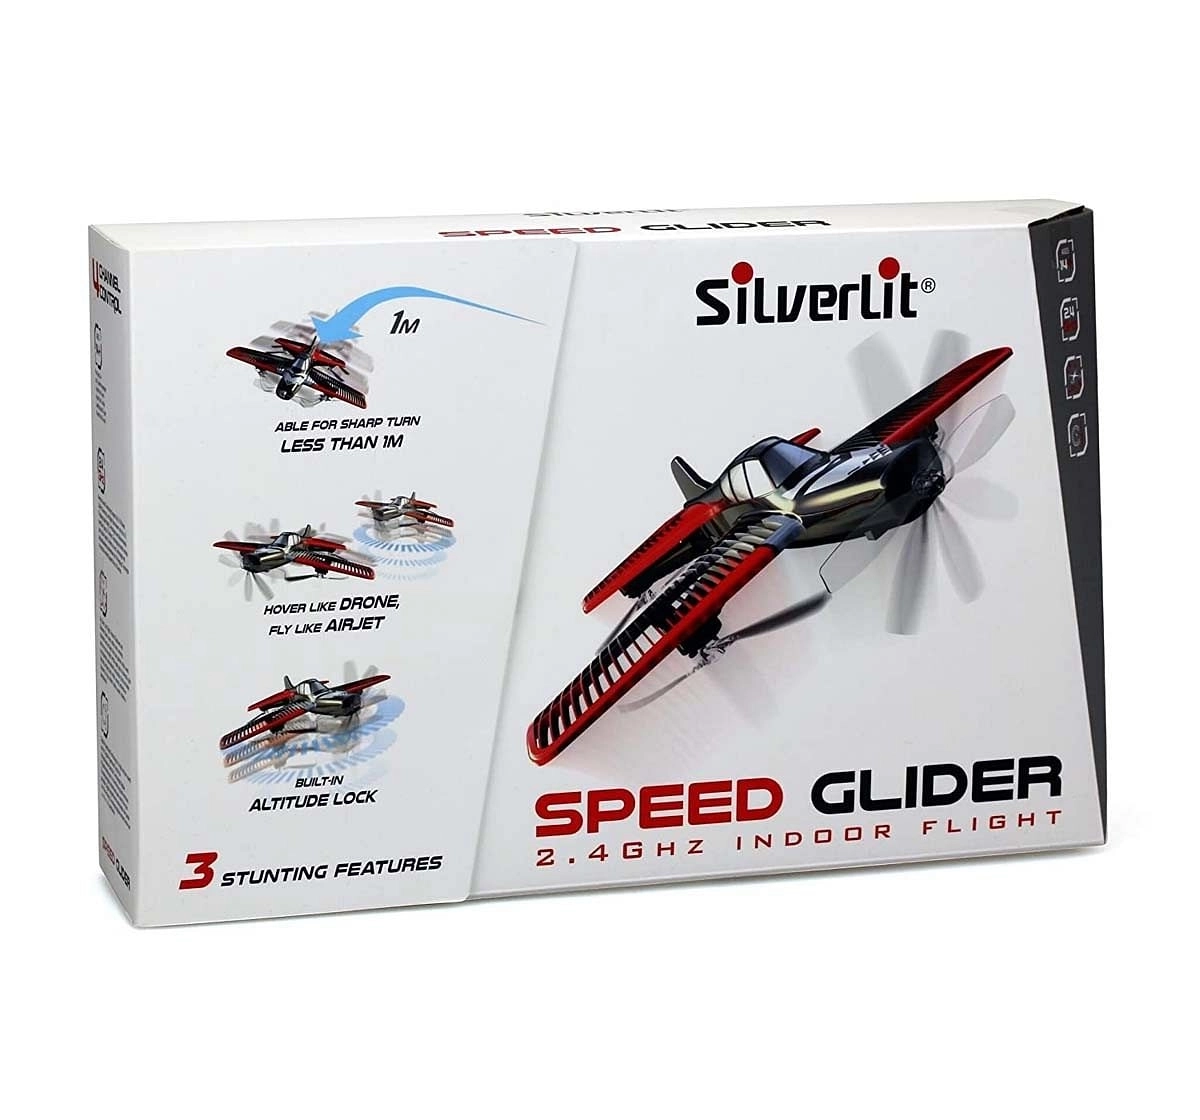 Silverlit Speed Glider Remote Control Toys for Kids age 14Y+ 